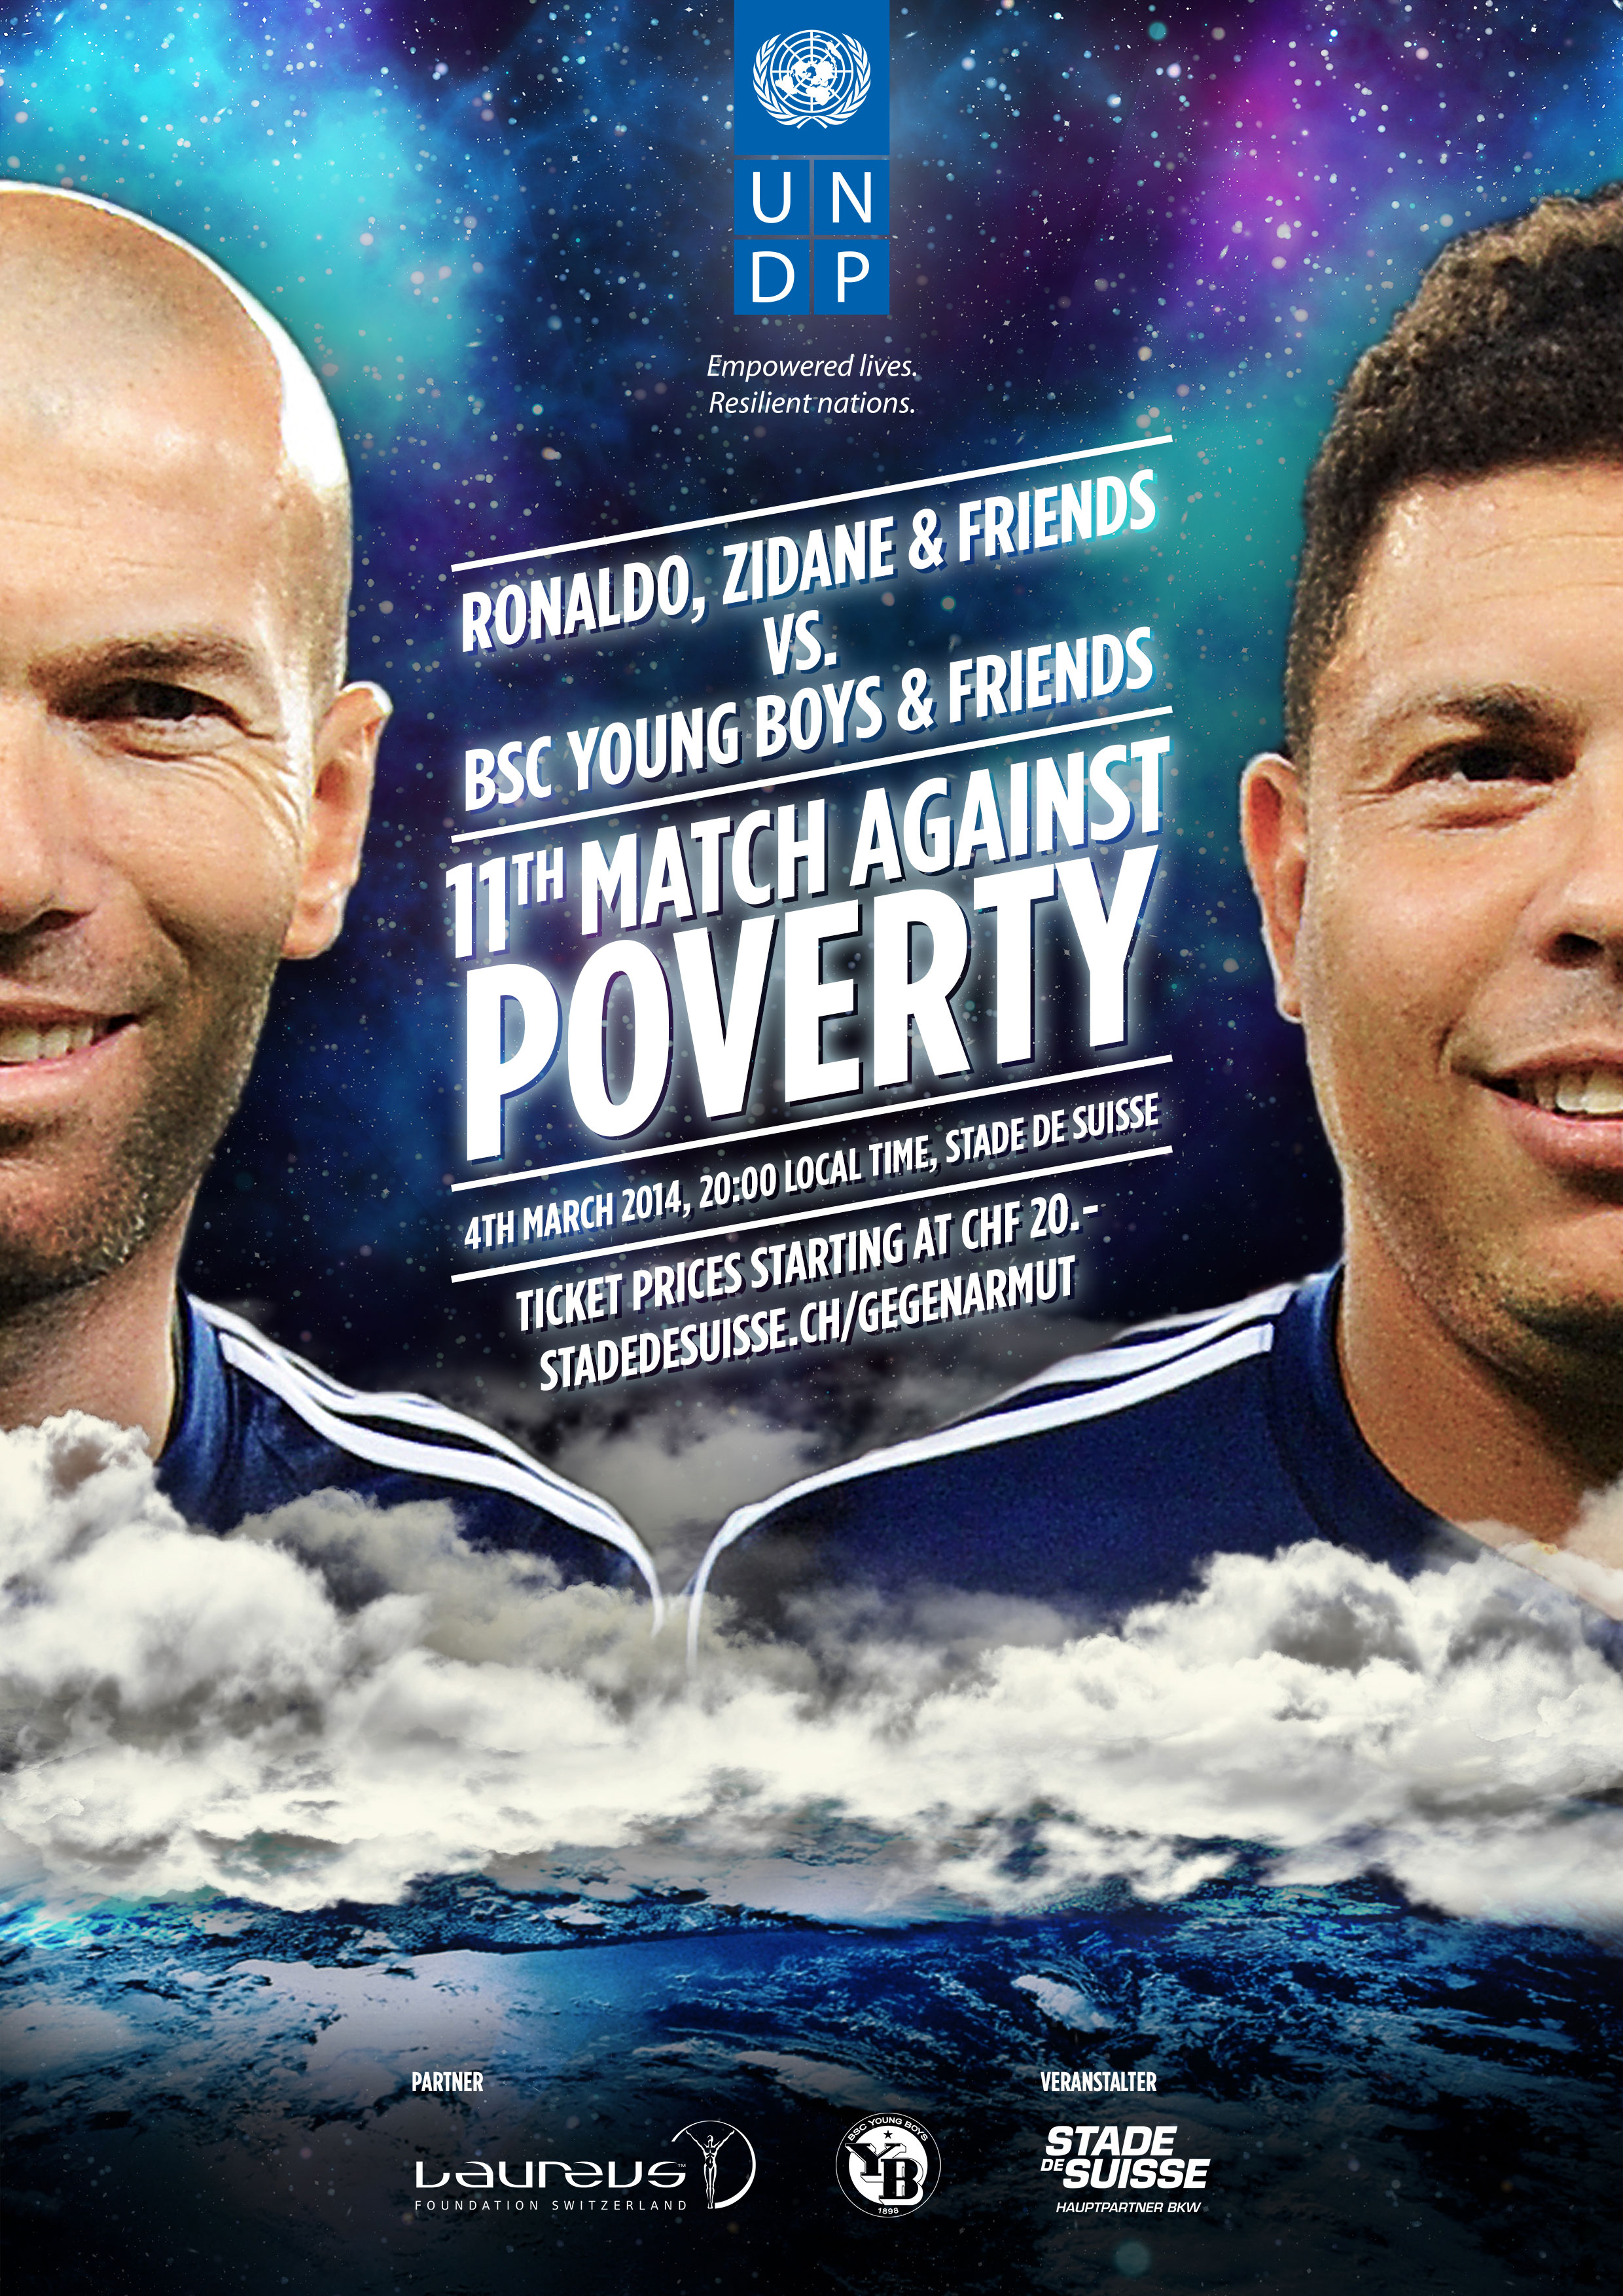 Deco, Nedved, Roberto Carlos and Referee Collina, to Join Ronaldo and Zidane in 11th Annual Match Against Poverty